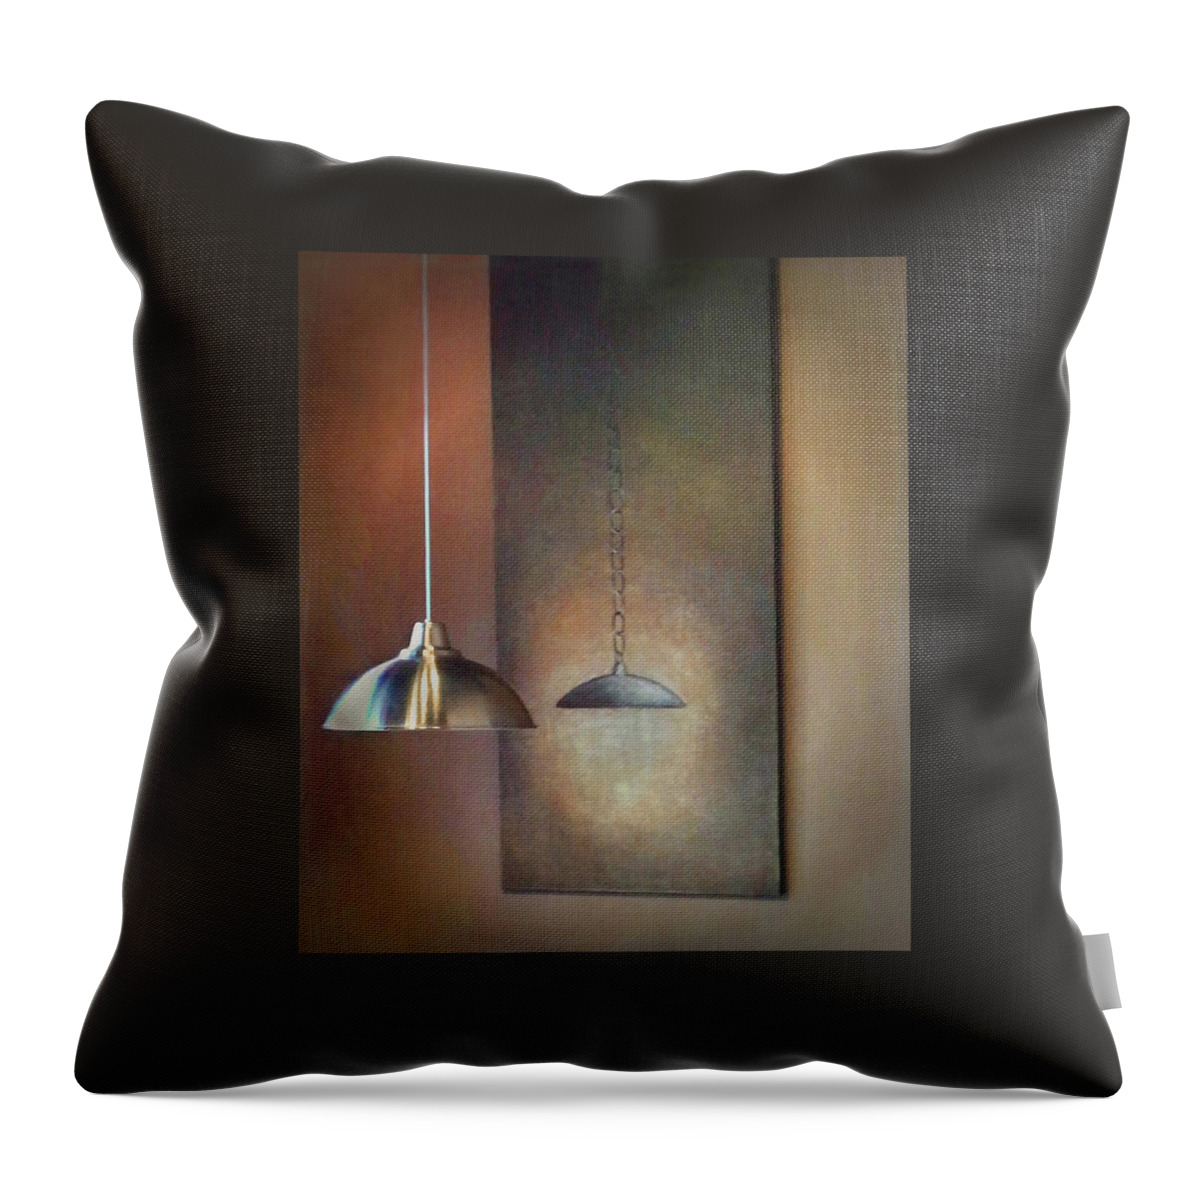 Lamp Throw Pillow featuring the photograph Art imitates life by Bob McDonnell